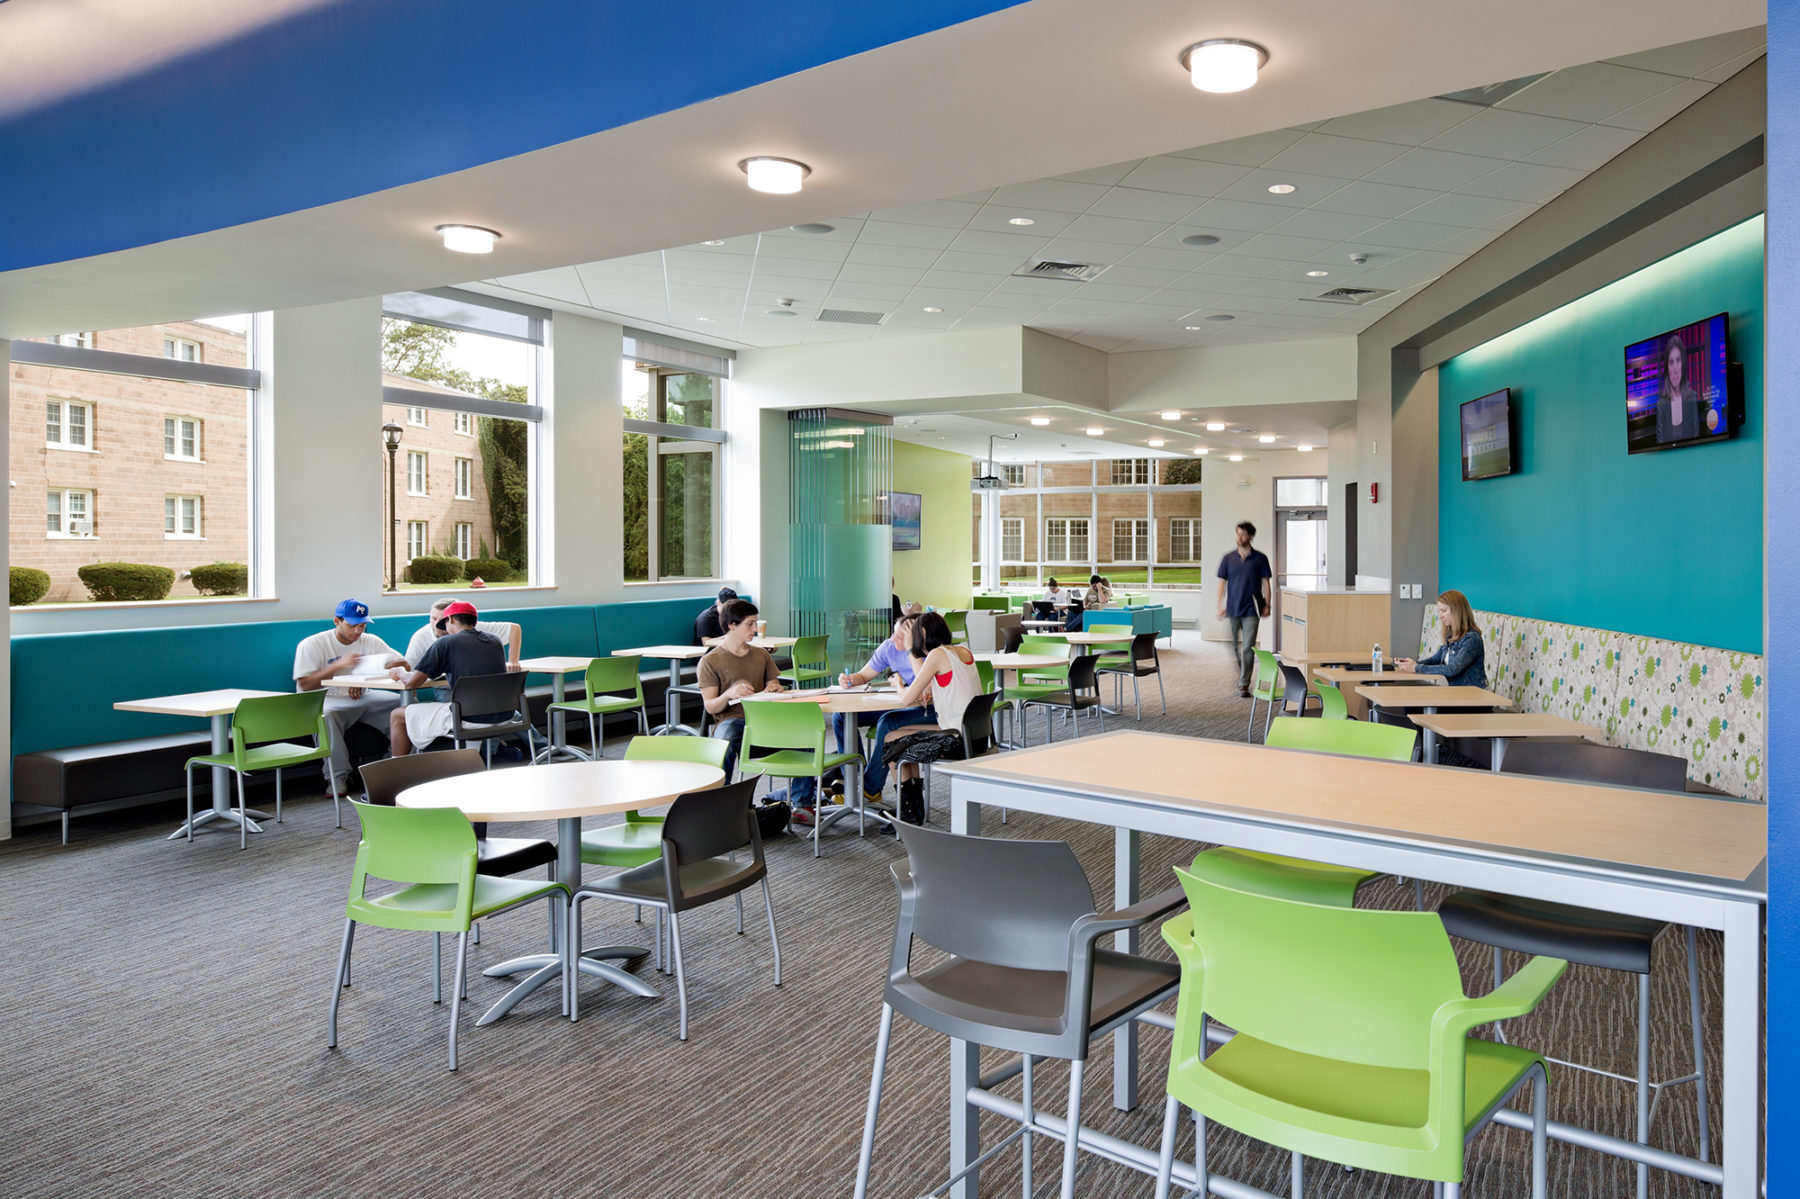 Interior photo of collaborate space. Students sit in groups at multiple tables.